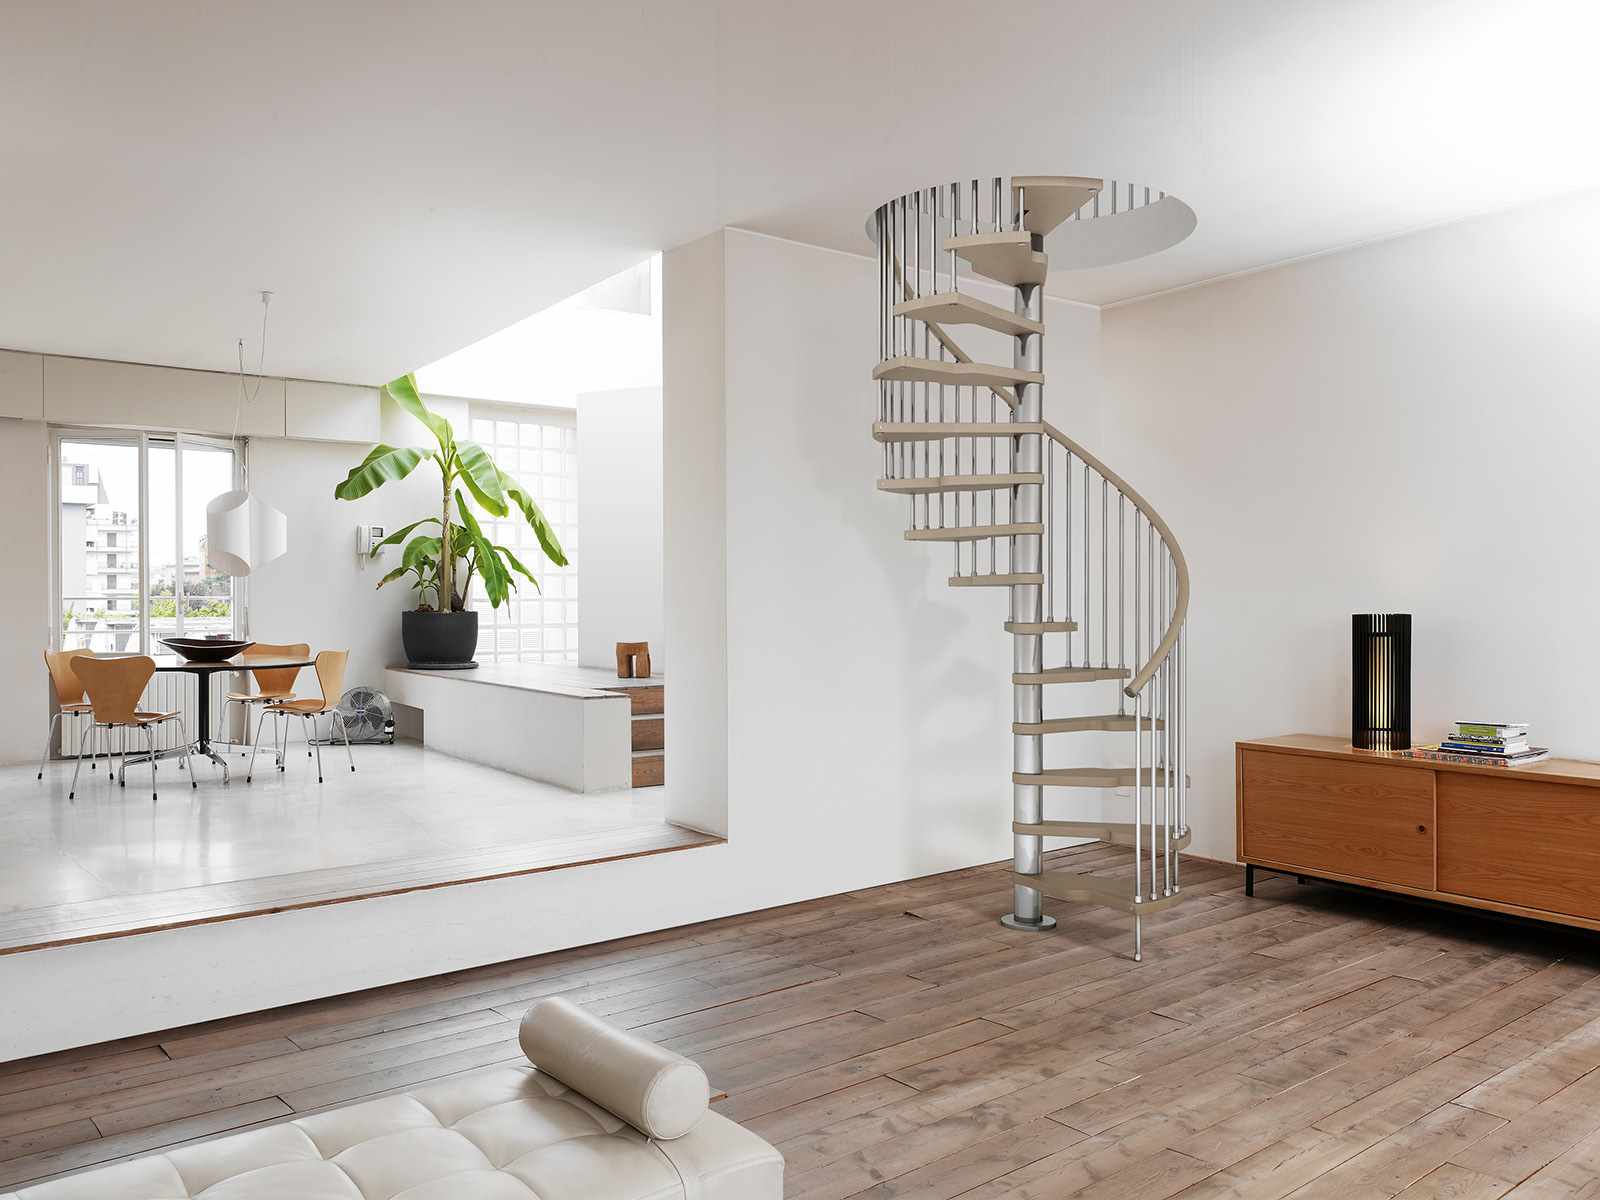 the idea of ​​an unusual style of stairs